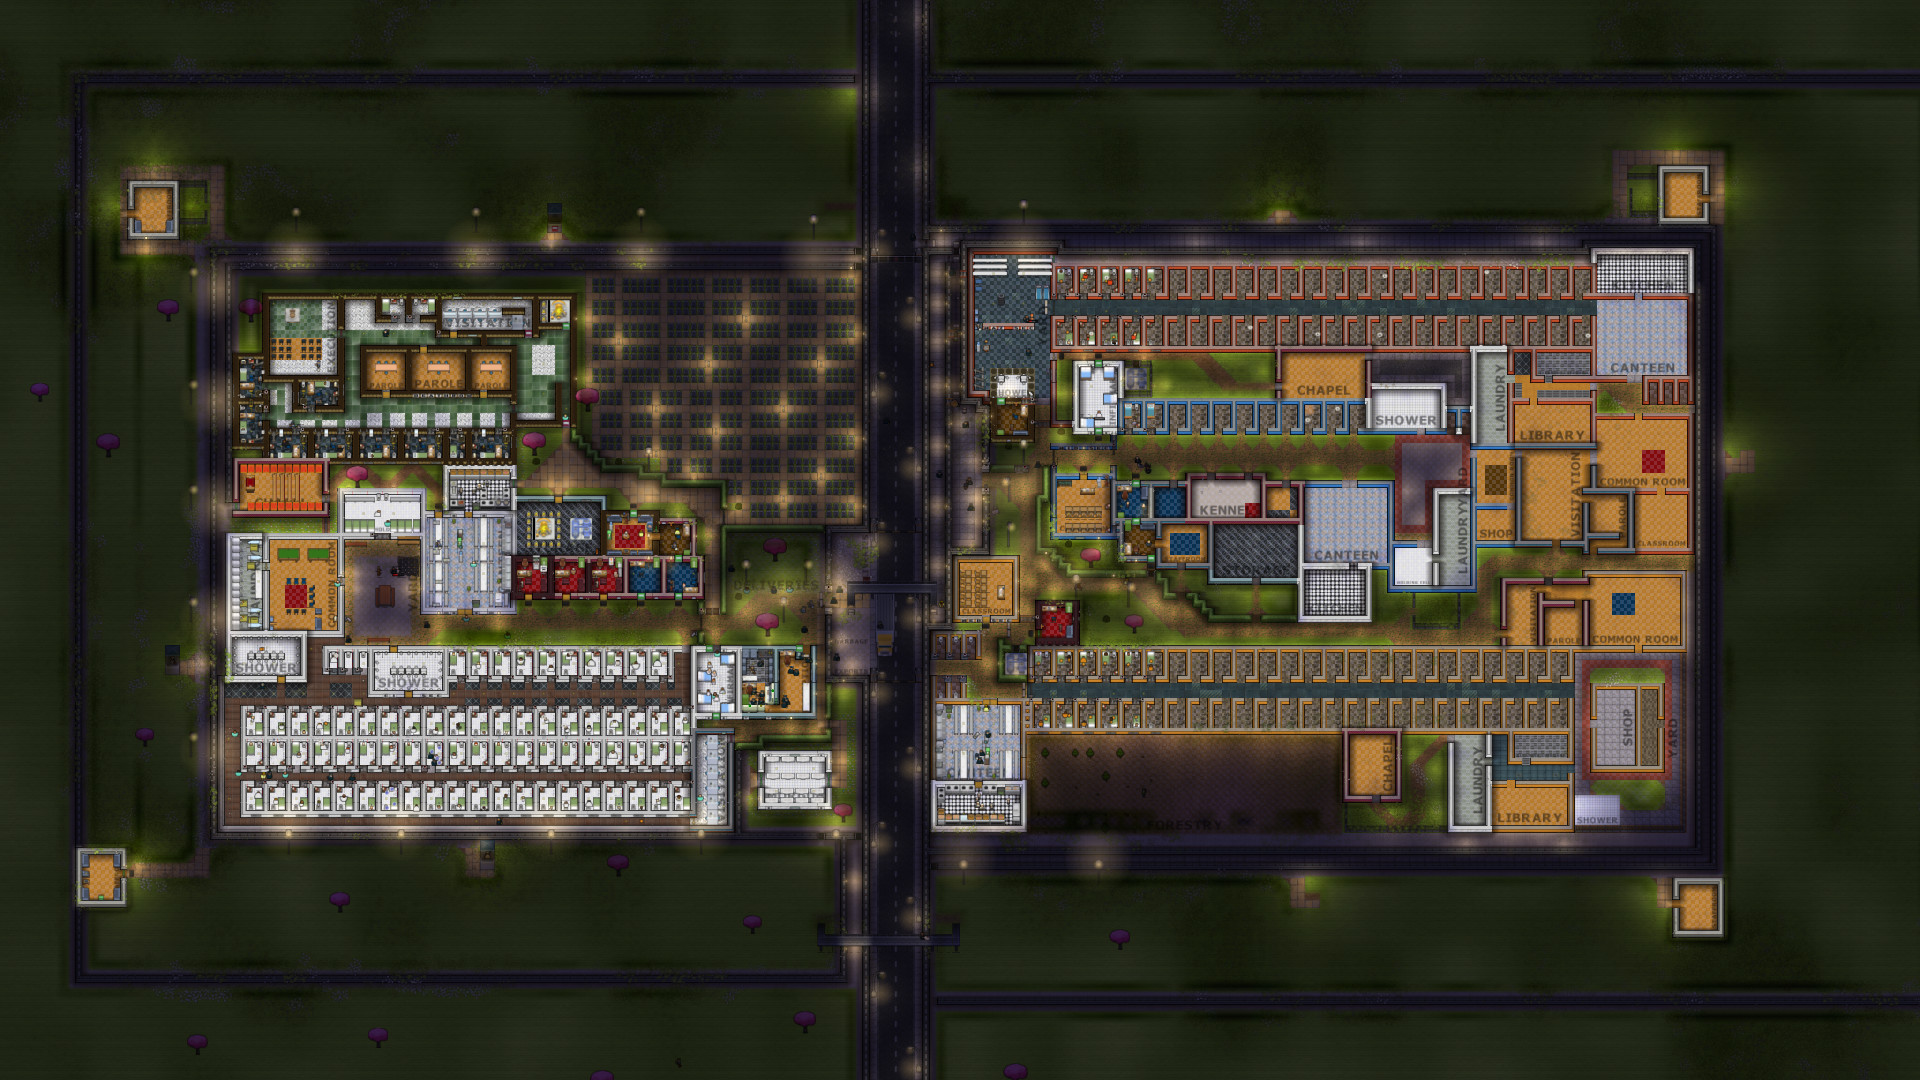 Steam Prison Architect Cleared For Transfer